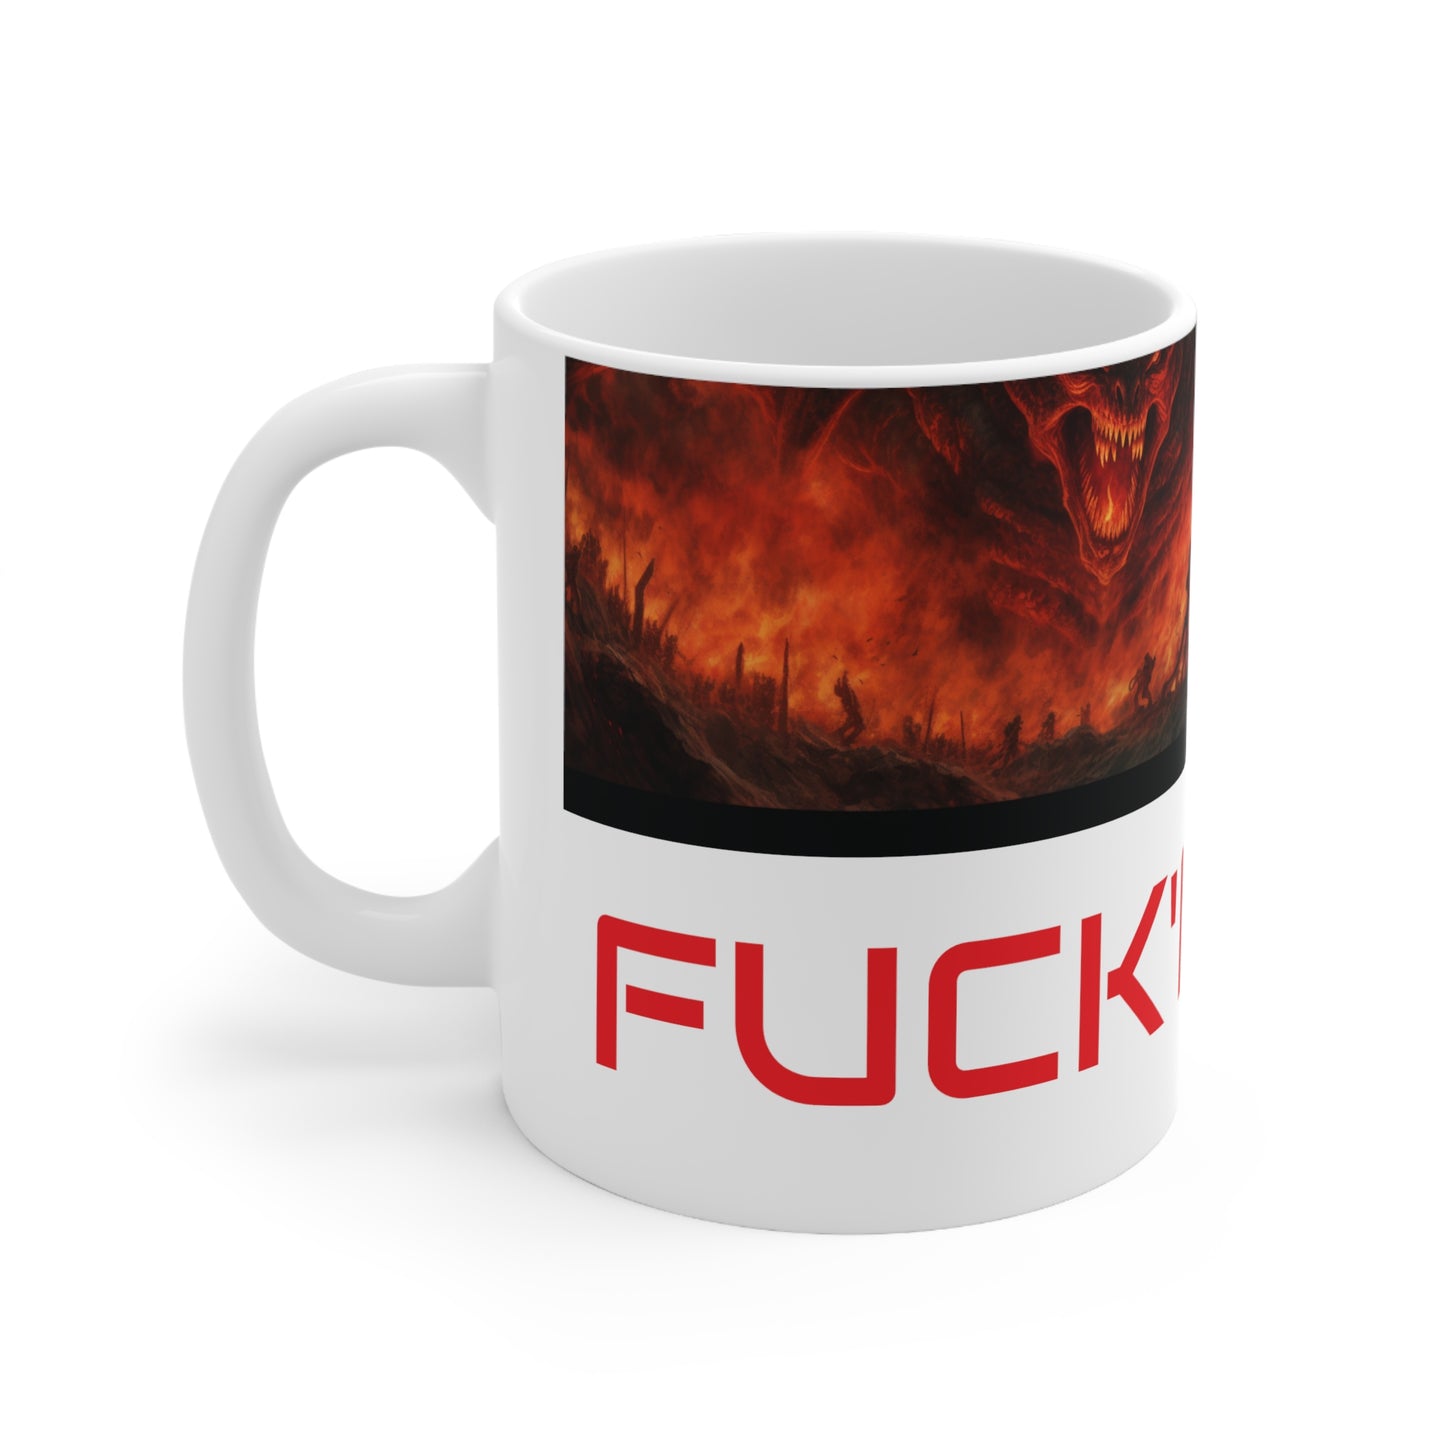 ifllucial FKN HELL MUG, Original Art By ifllucial.
White ceramic
11 oz (0.33 l)
Rounded corners
C-handle
Lead and BPA-freeMug